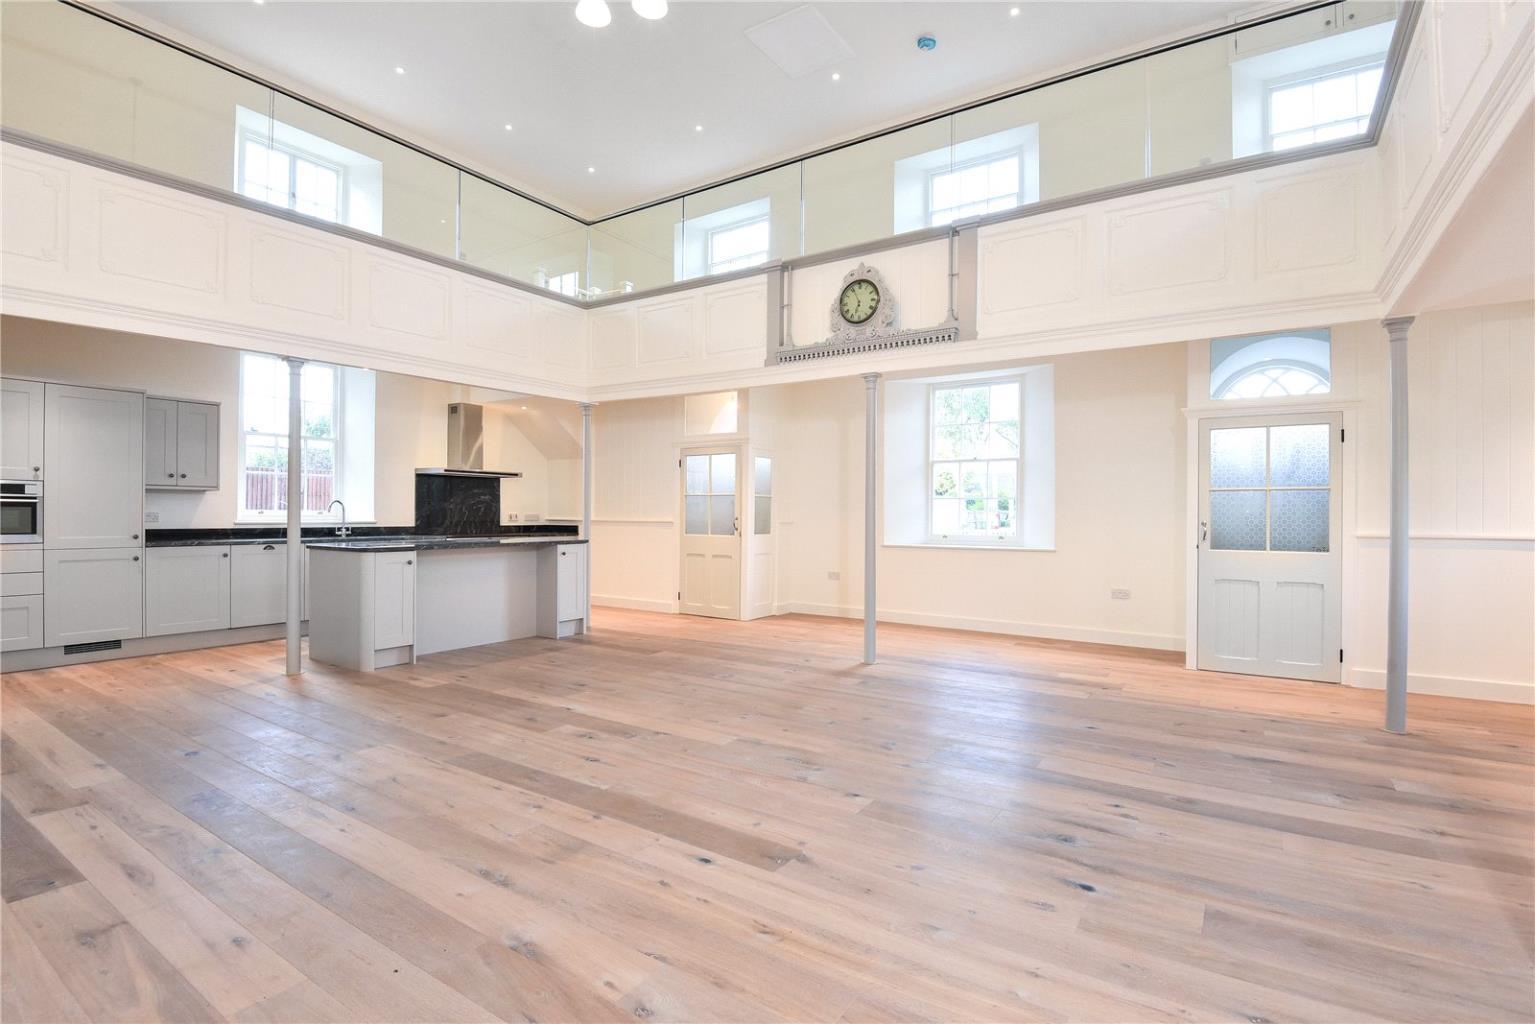 Inside, the converted chapel is modern and bright. Image: Bedford Estate Agents